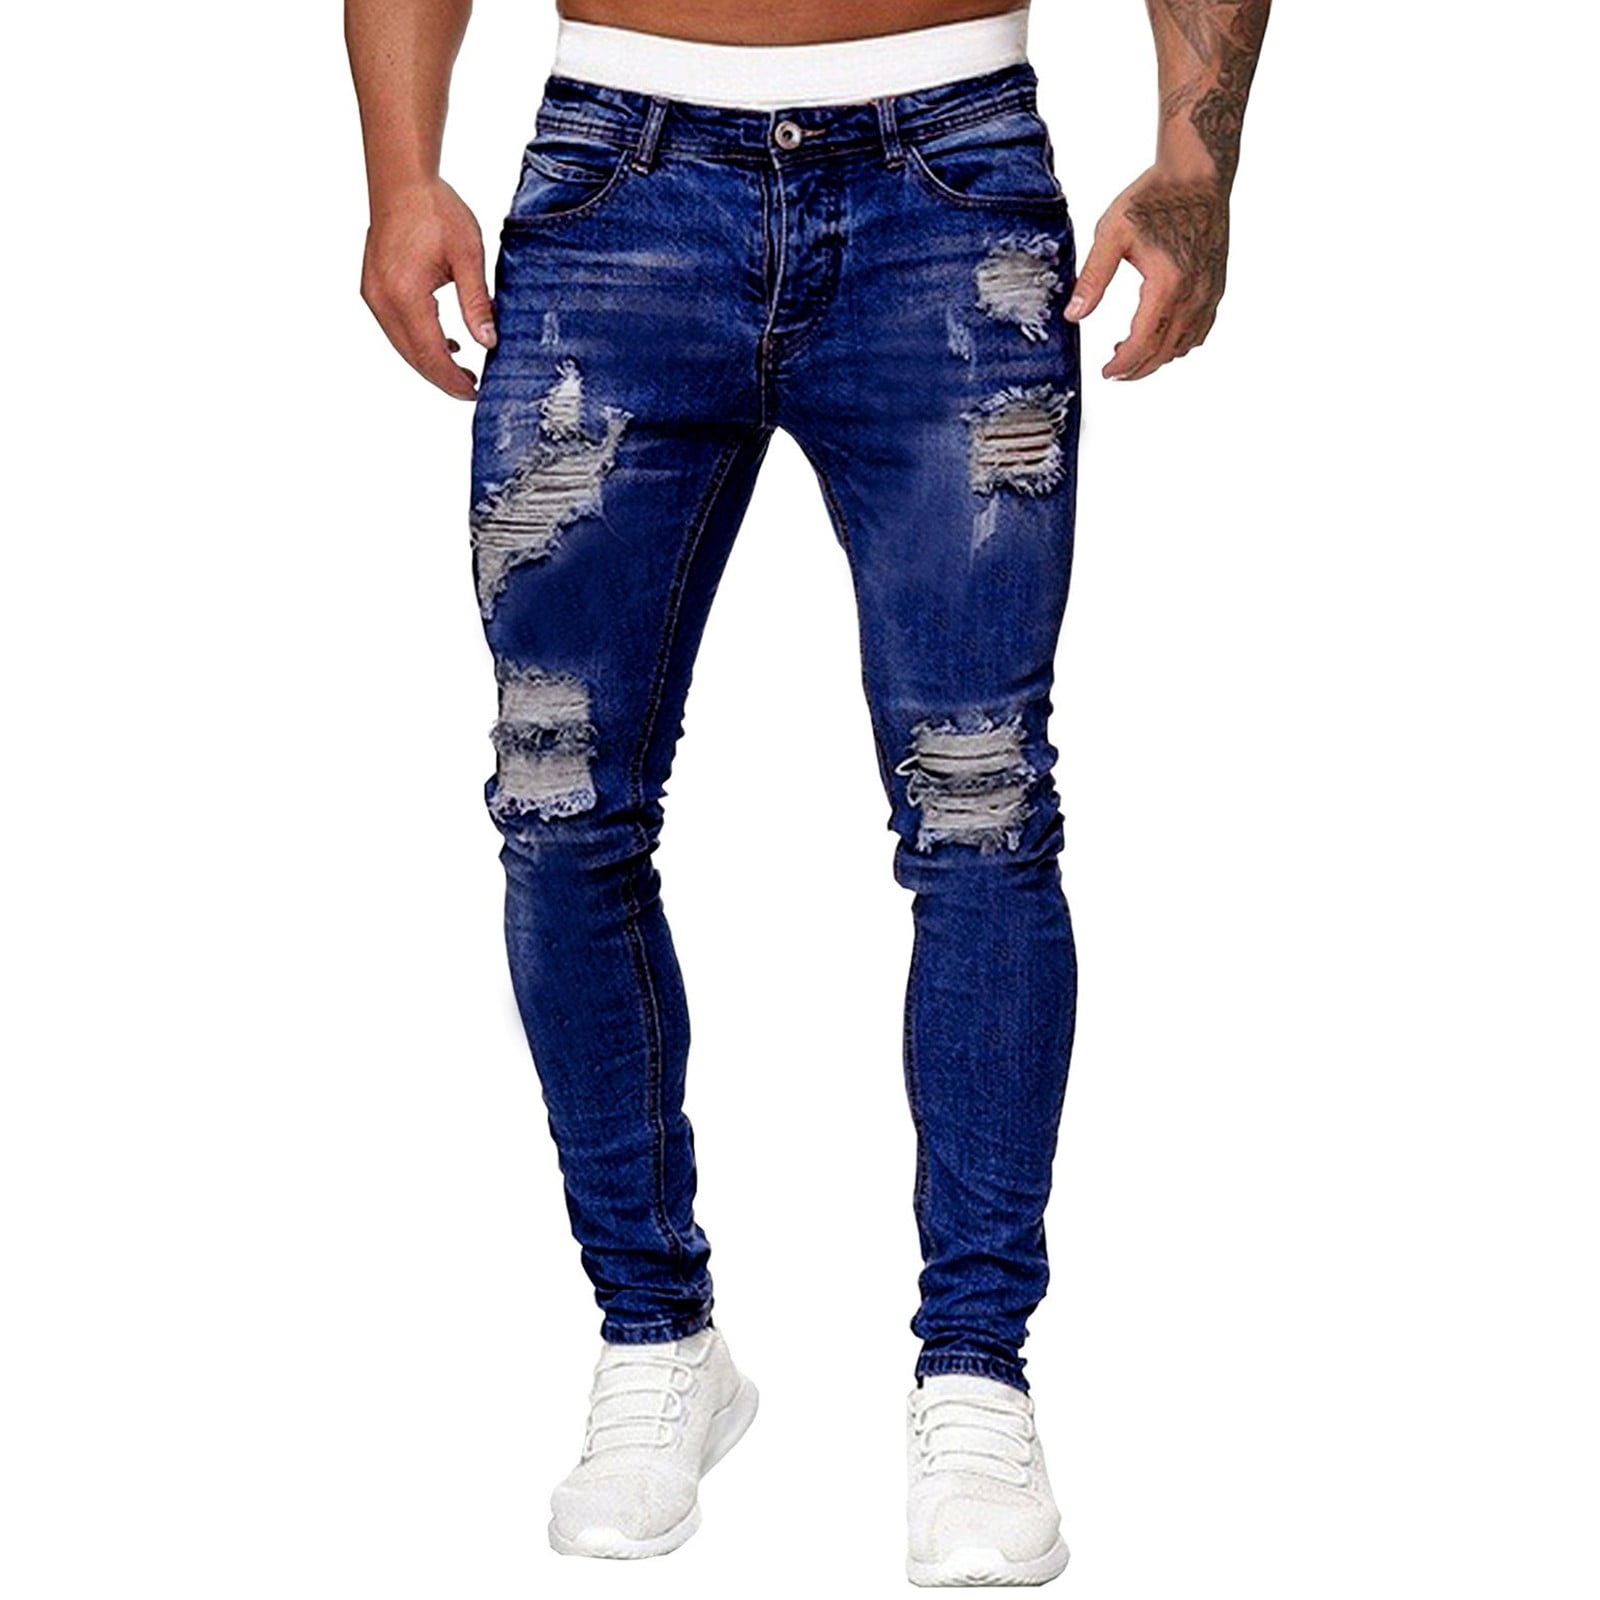 Qufokar Imperious Pants Jean Regular Fit Washed Frayed Ripped Holes ...